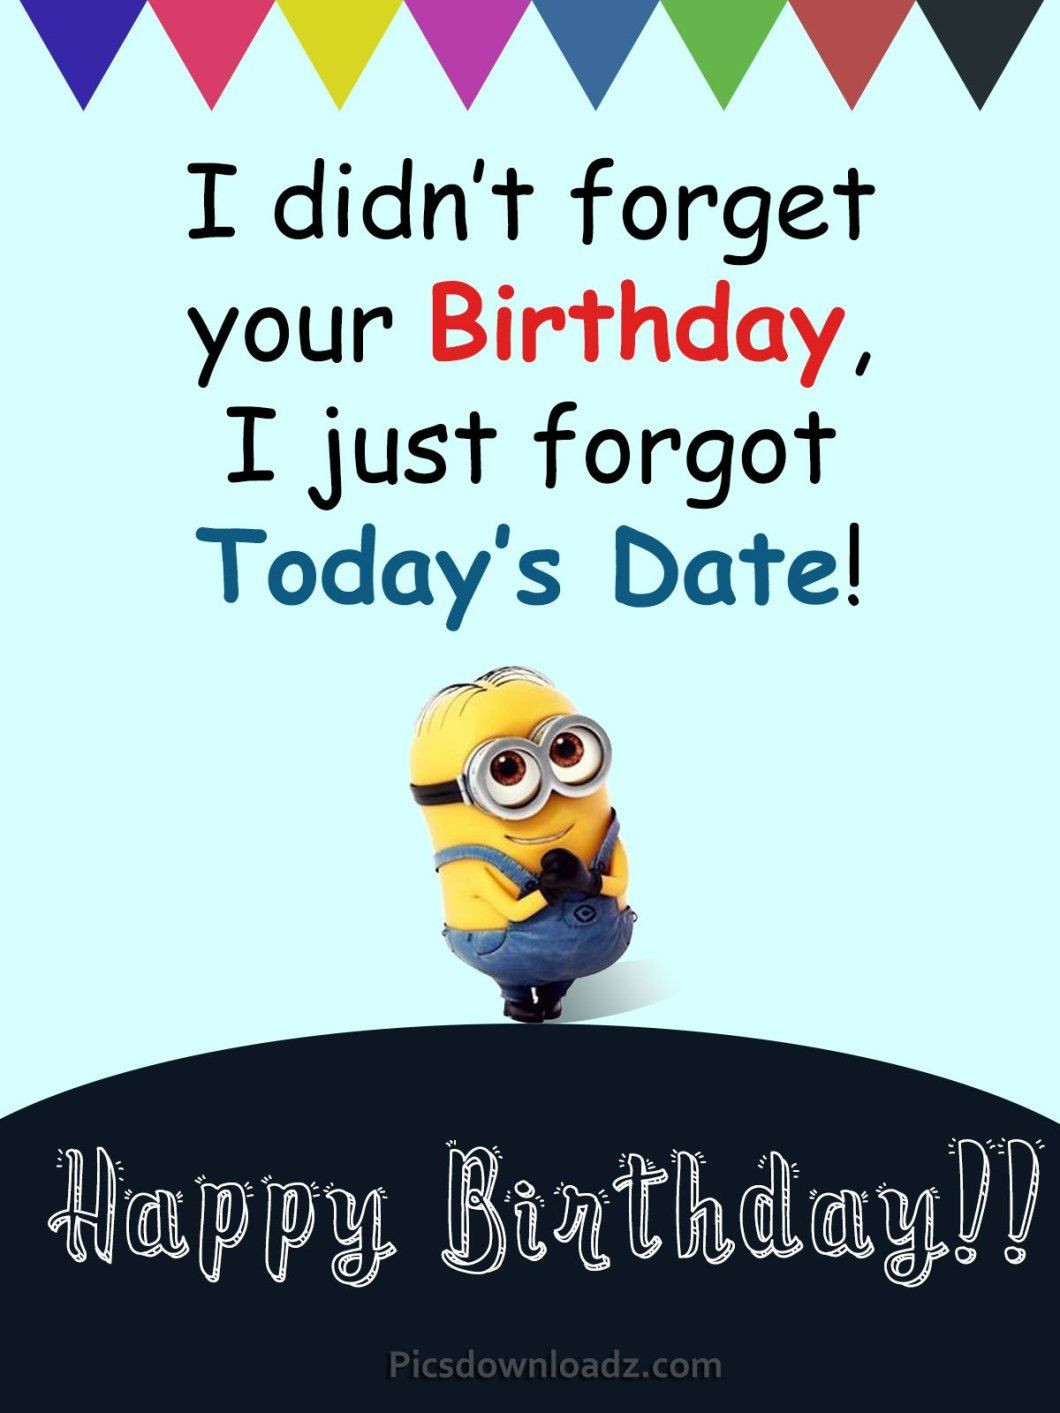 Happy Birthday Wishes To A Friend Funny
 Funny Happy Birthday Wishes for Best Friend – Happy